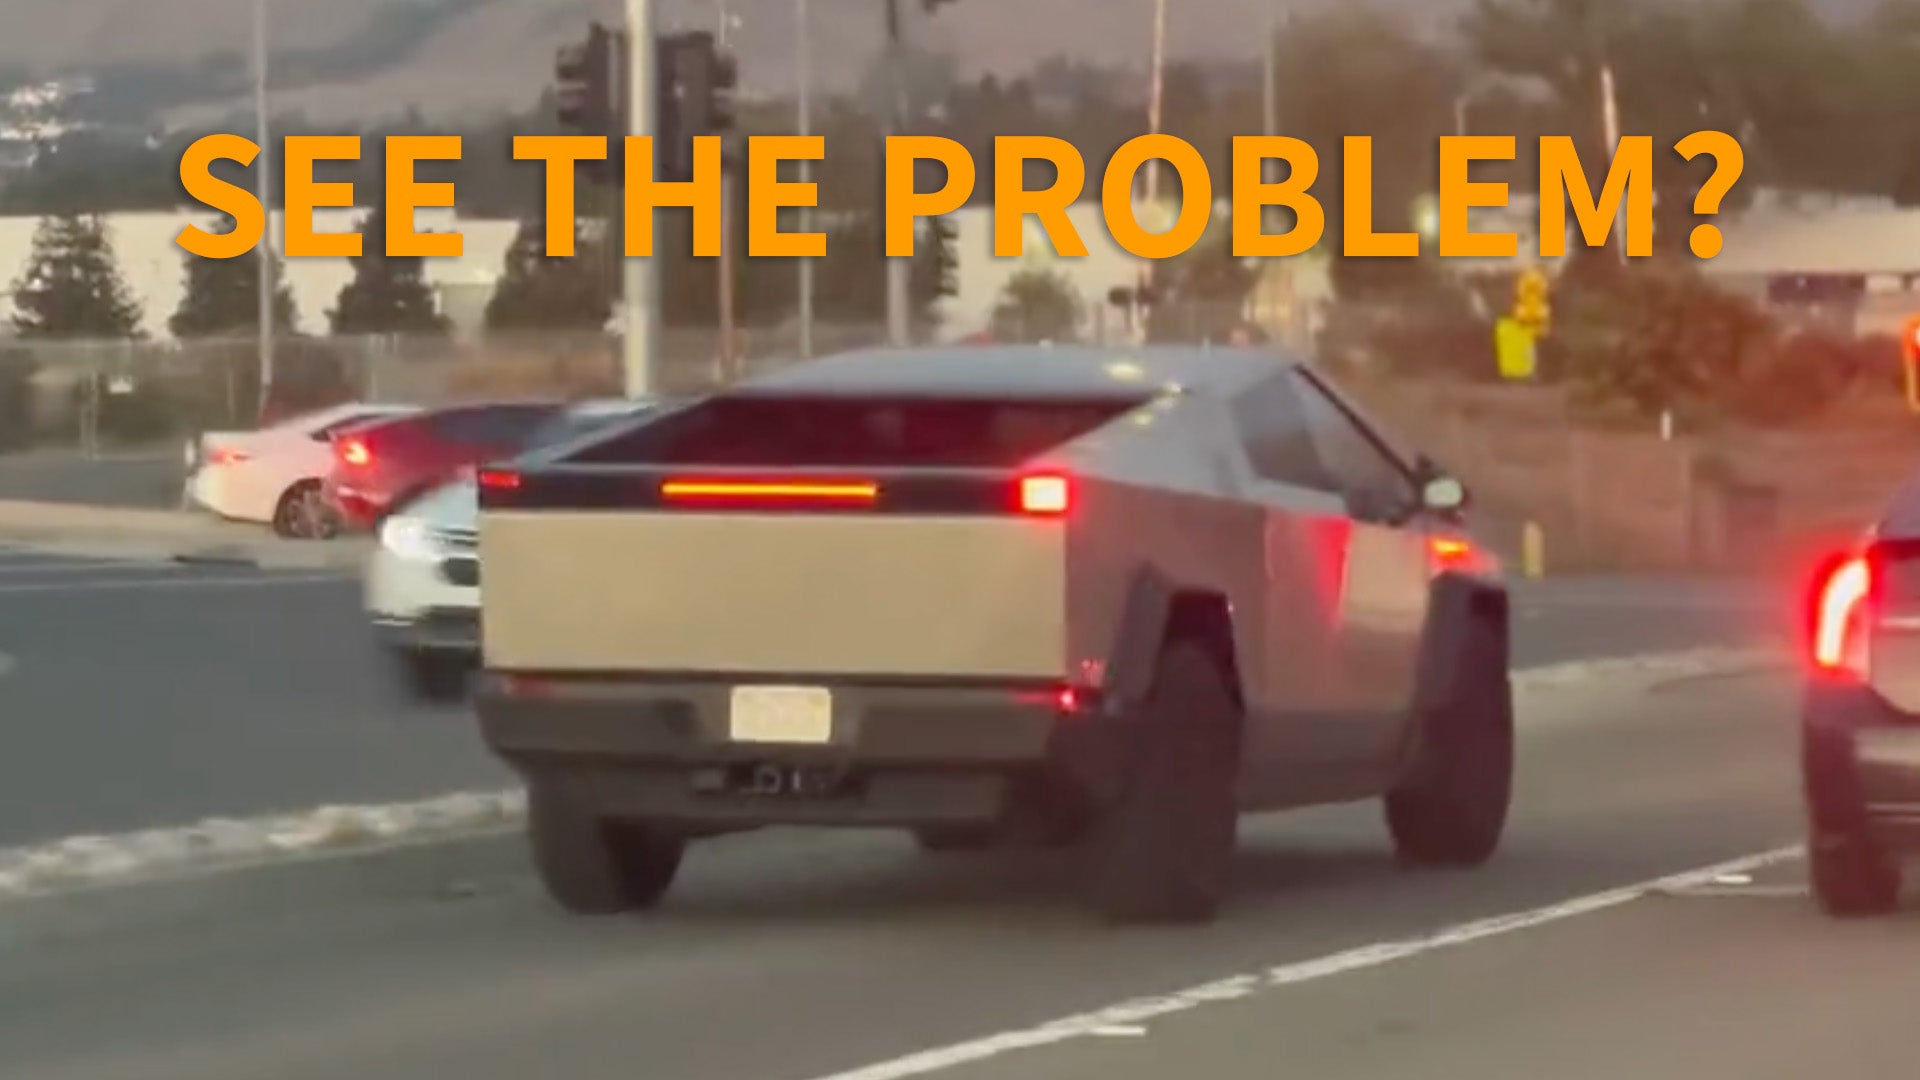 The brake lights of the Tesla Cybertruck don’t seem logical either.